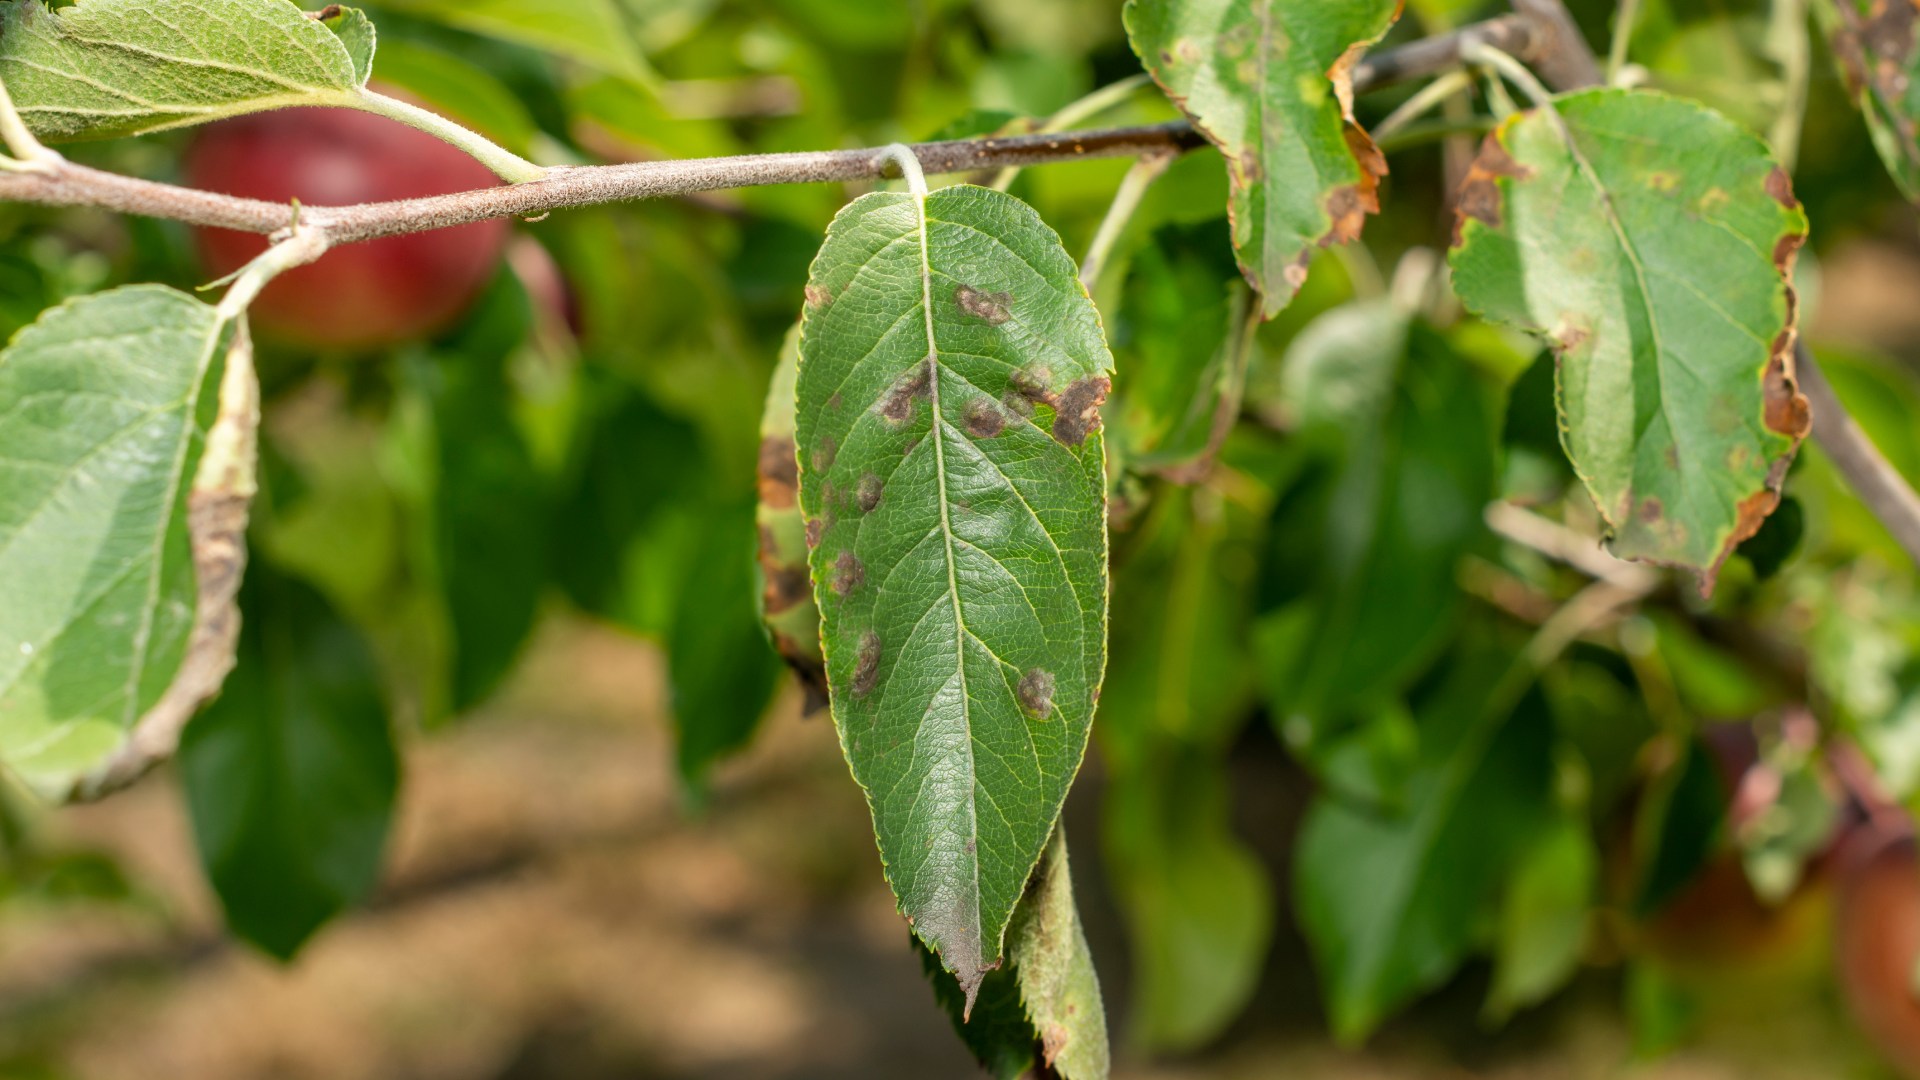 Apple scab tree disease found on client's property in Lansing, MI.